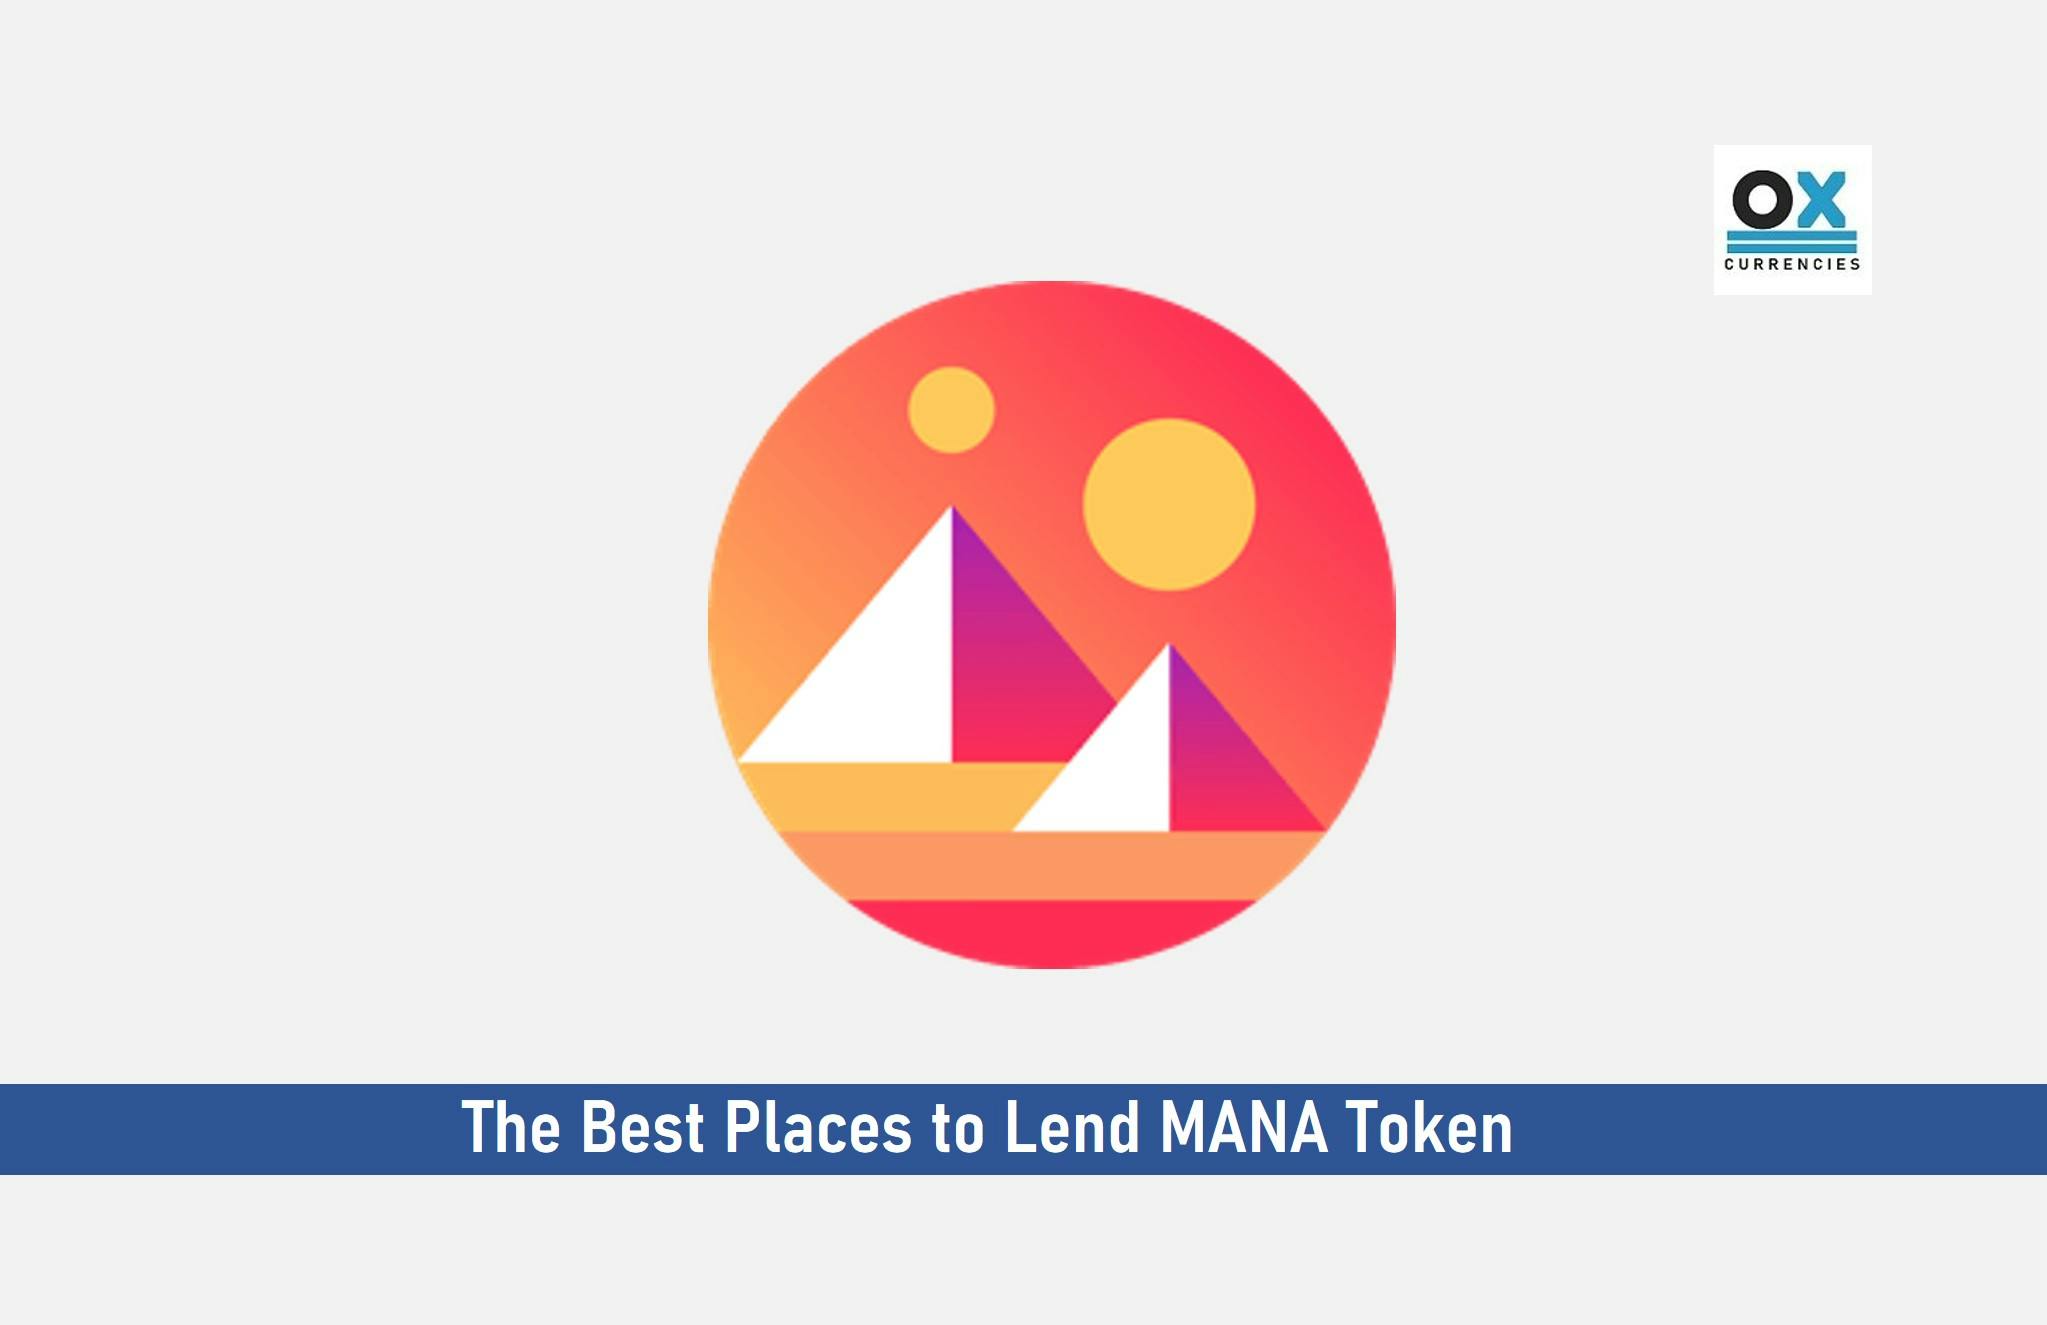 The Best Places to Lend MANA Token